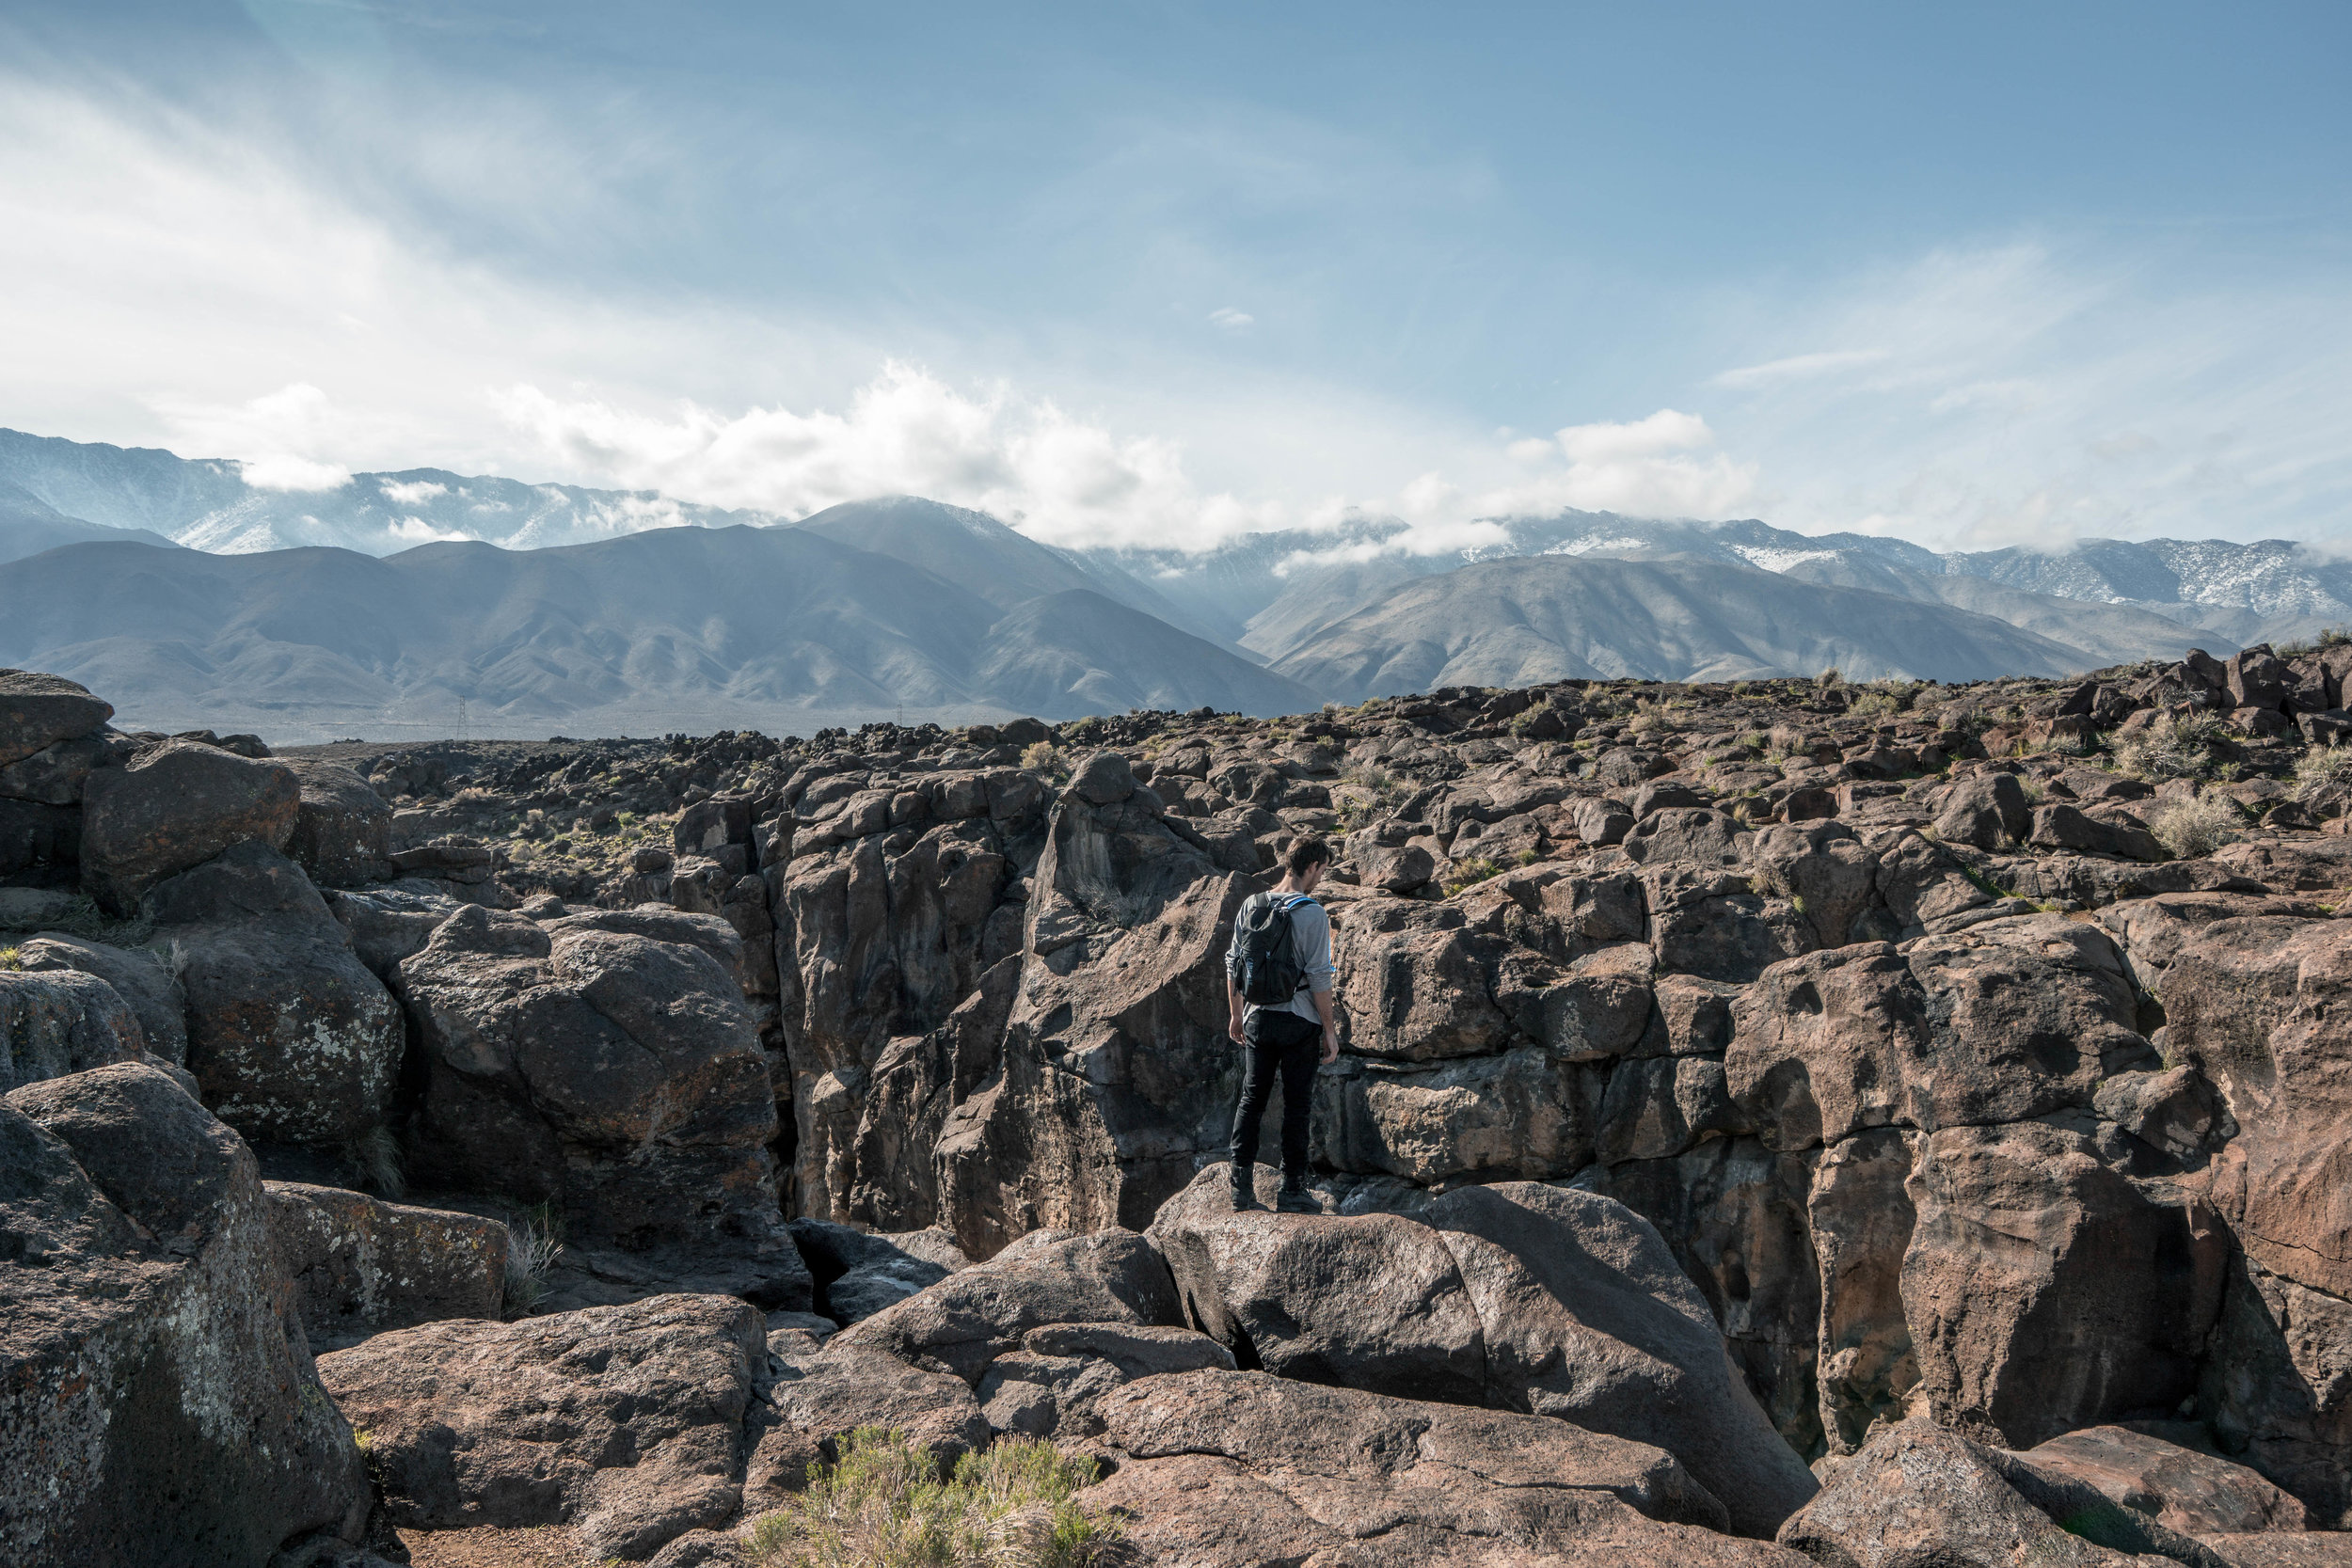 One particular volcanic eruption temporarily redirected the Owens Valley River over an existing bed of lava rock creating this magnificent scar in the Earth. 